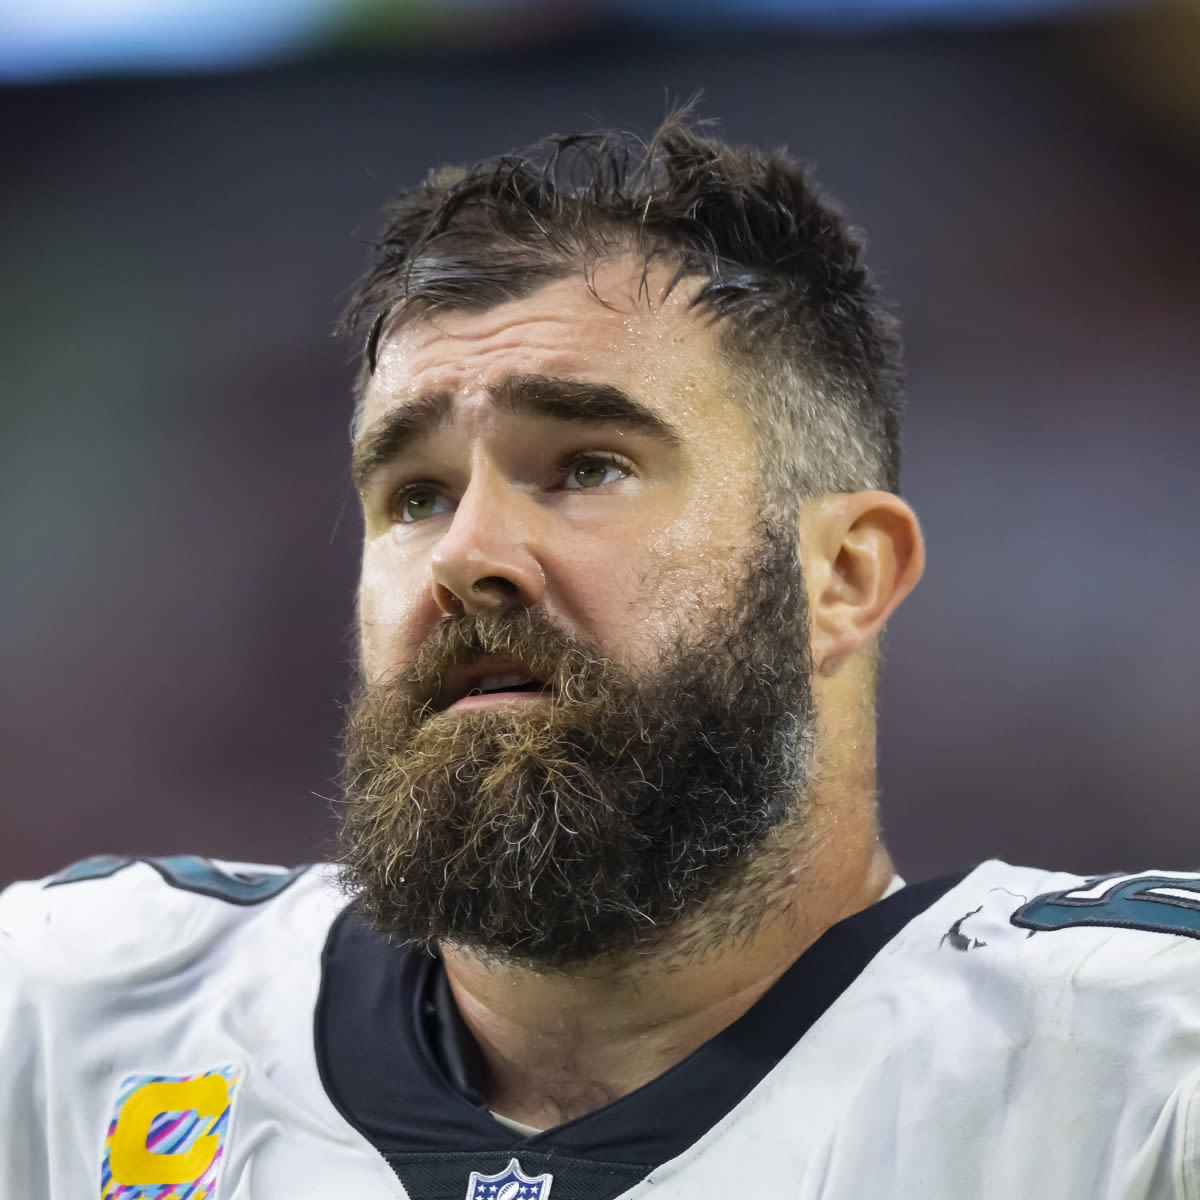 Jason And Kylie Kelce Absolutely Destroyed A Fan In Bizarre Altercation